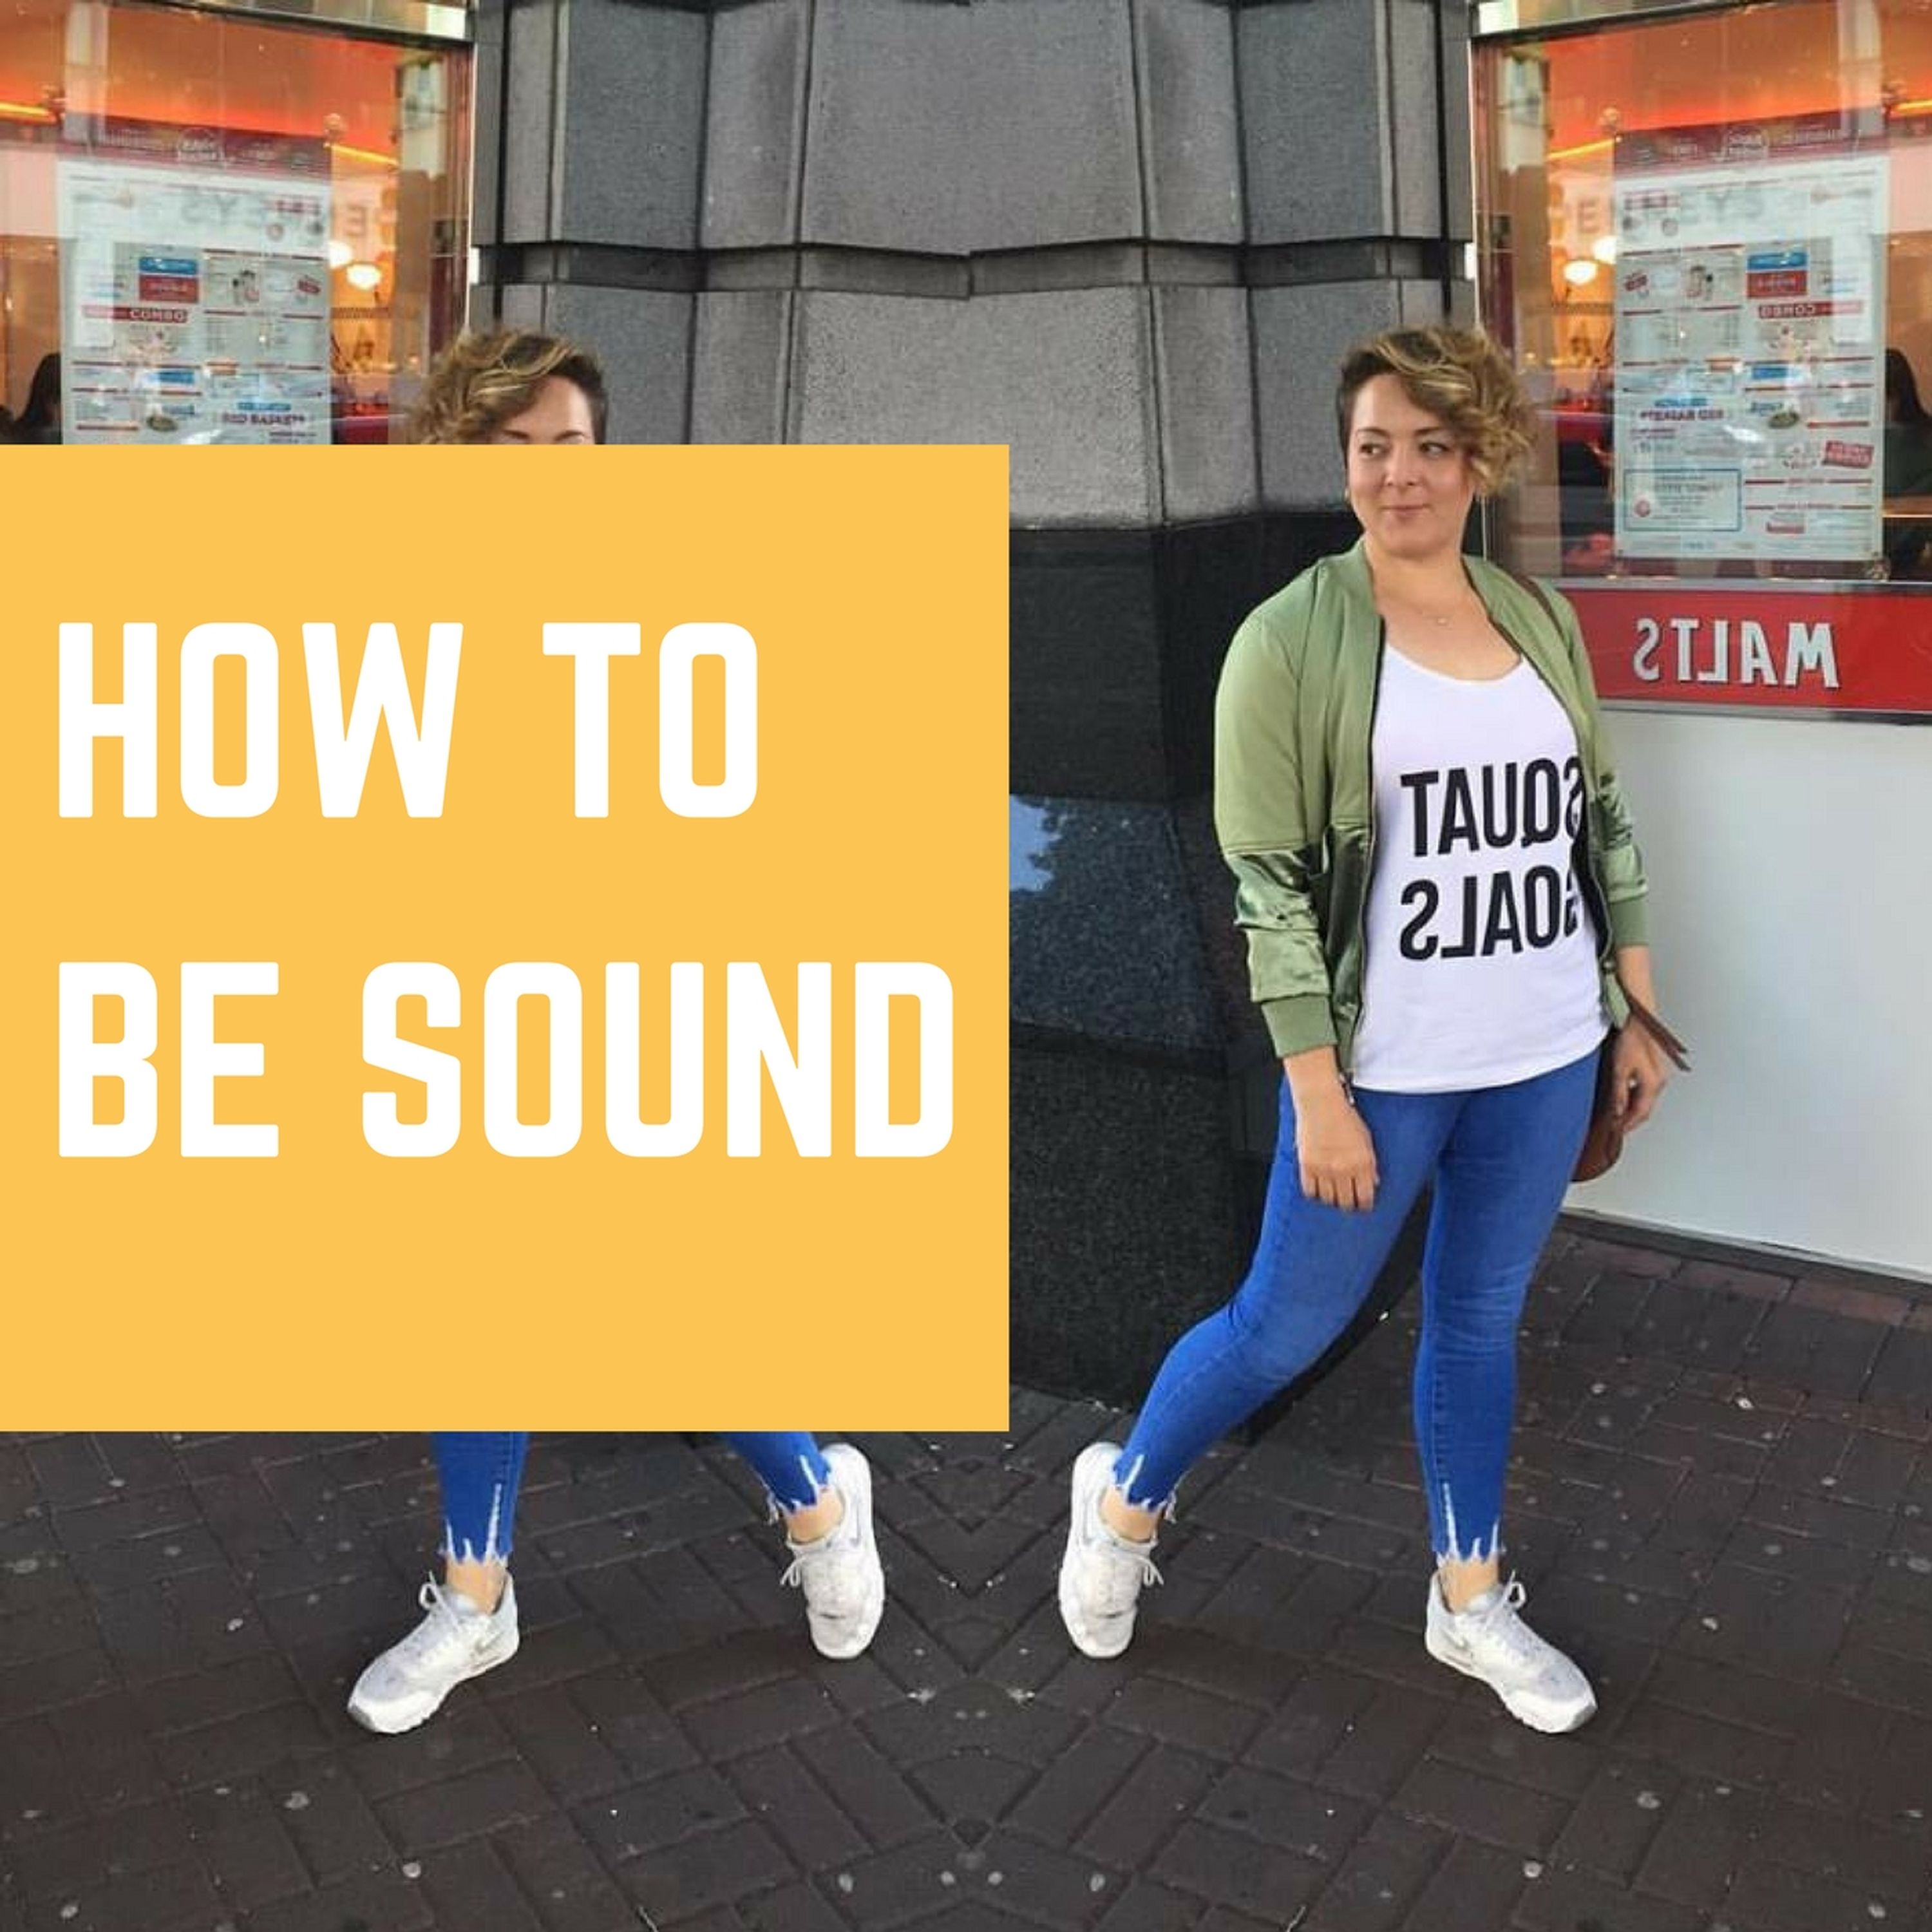 Jean Sutton on how to be sound